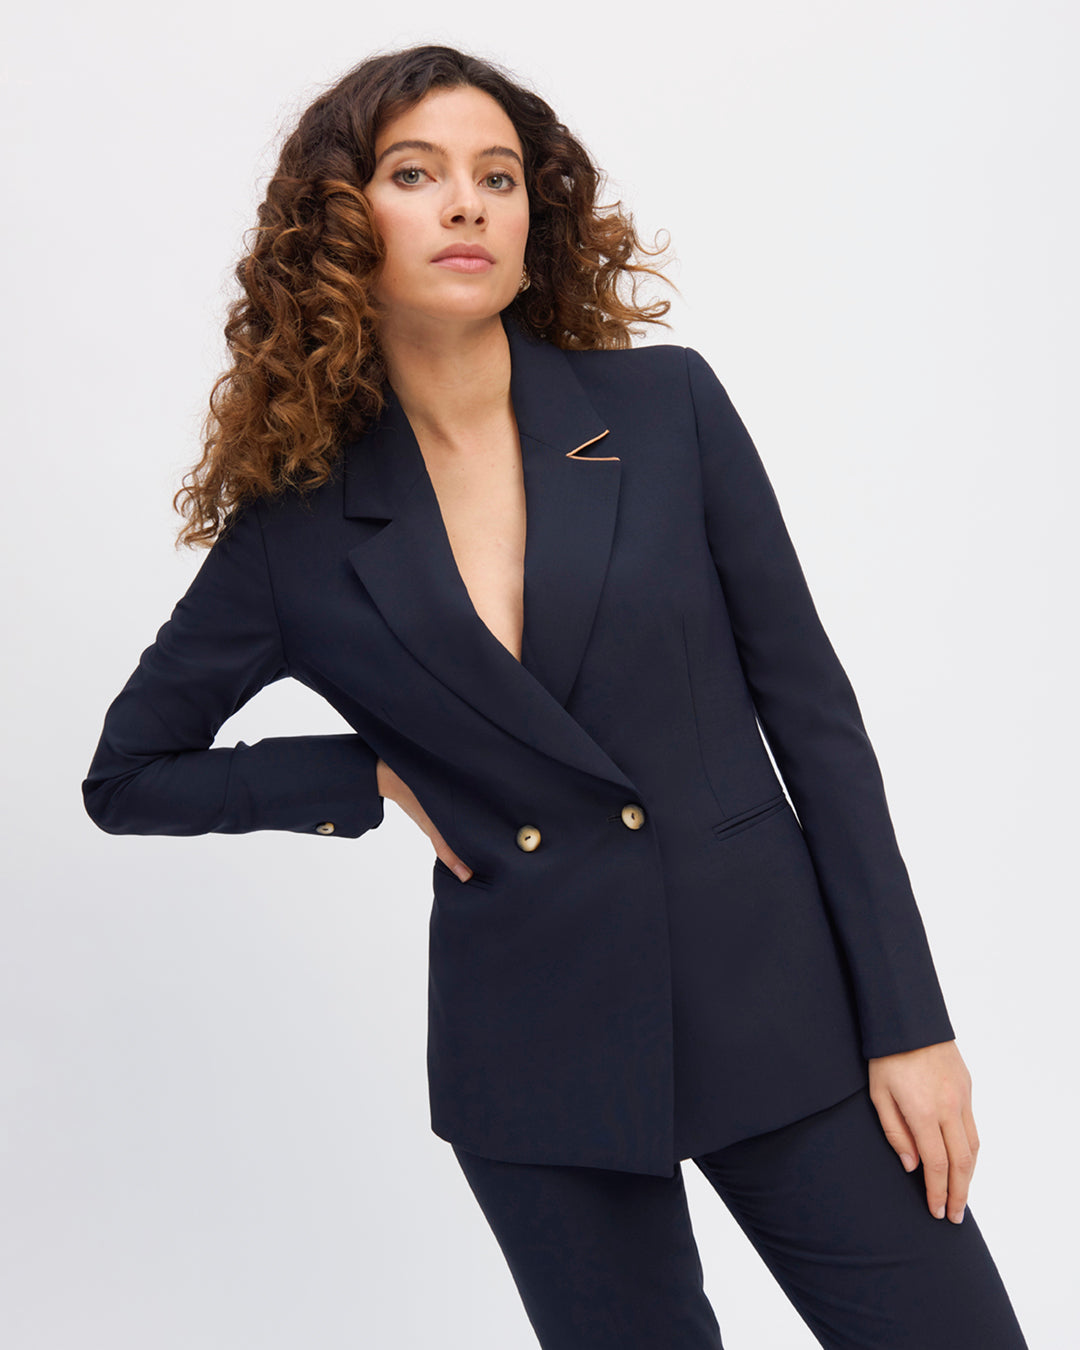 Long-blue-night-knit-jacket-cross-cut-and-curved-knit-collar-detachable-belt-toned-on-tone-two-slits-short-on-back-for-a-pretty-curvy-pinch-breasted-two-buttons-camel-17H10-knit-jacket-for-women-paris-